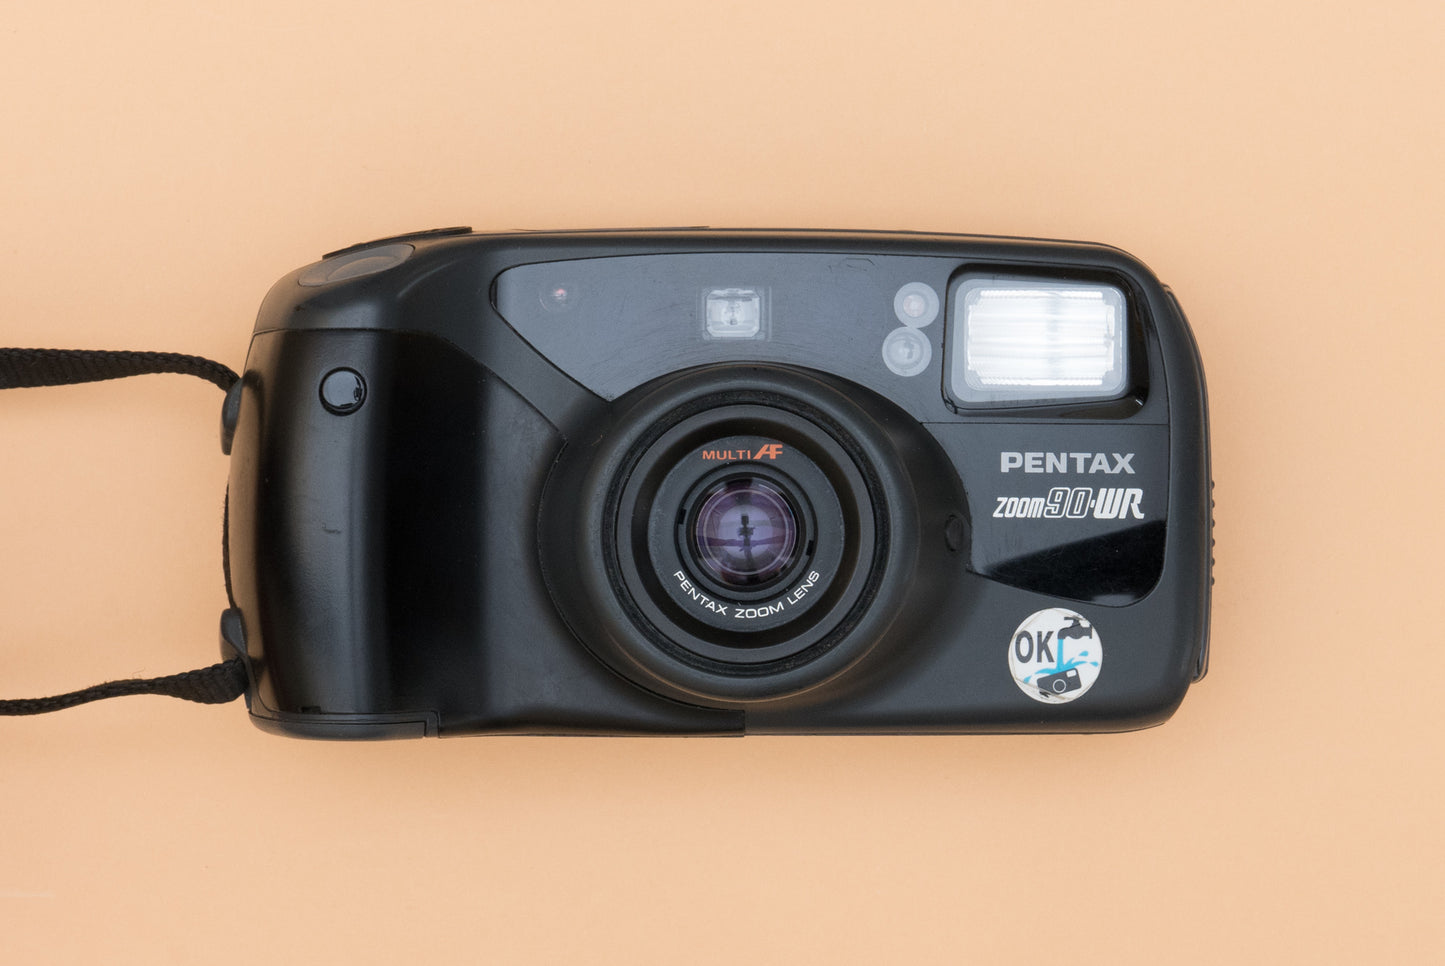 Pentax Zoom90-WR Compact 35mm Point and Shoot Film Camera